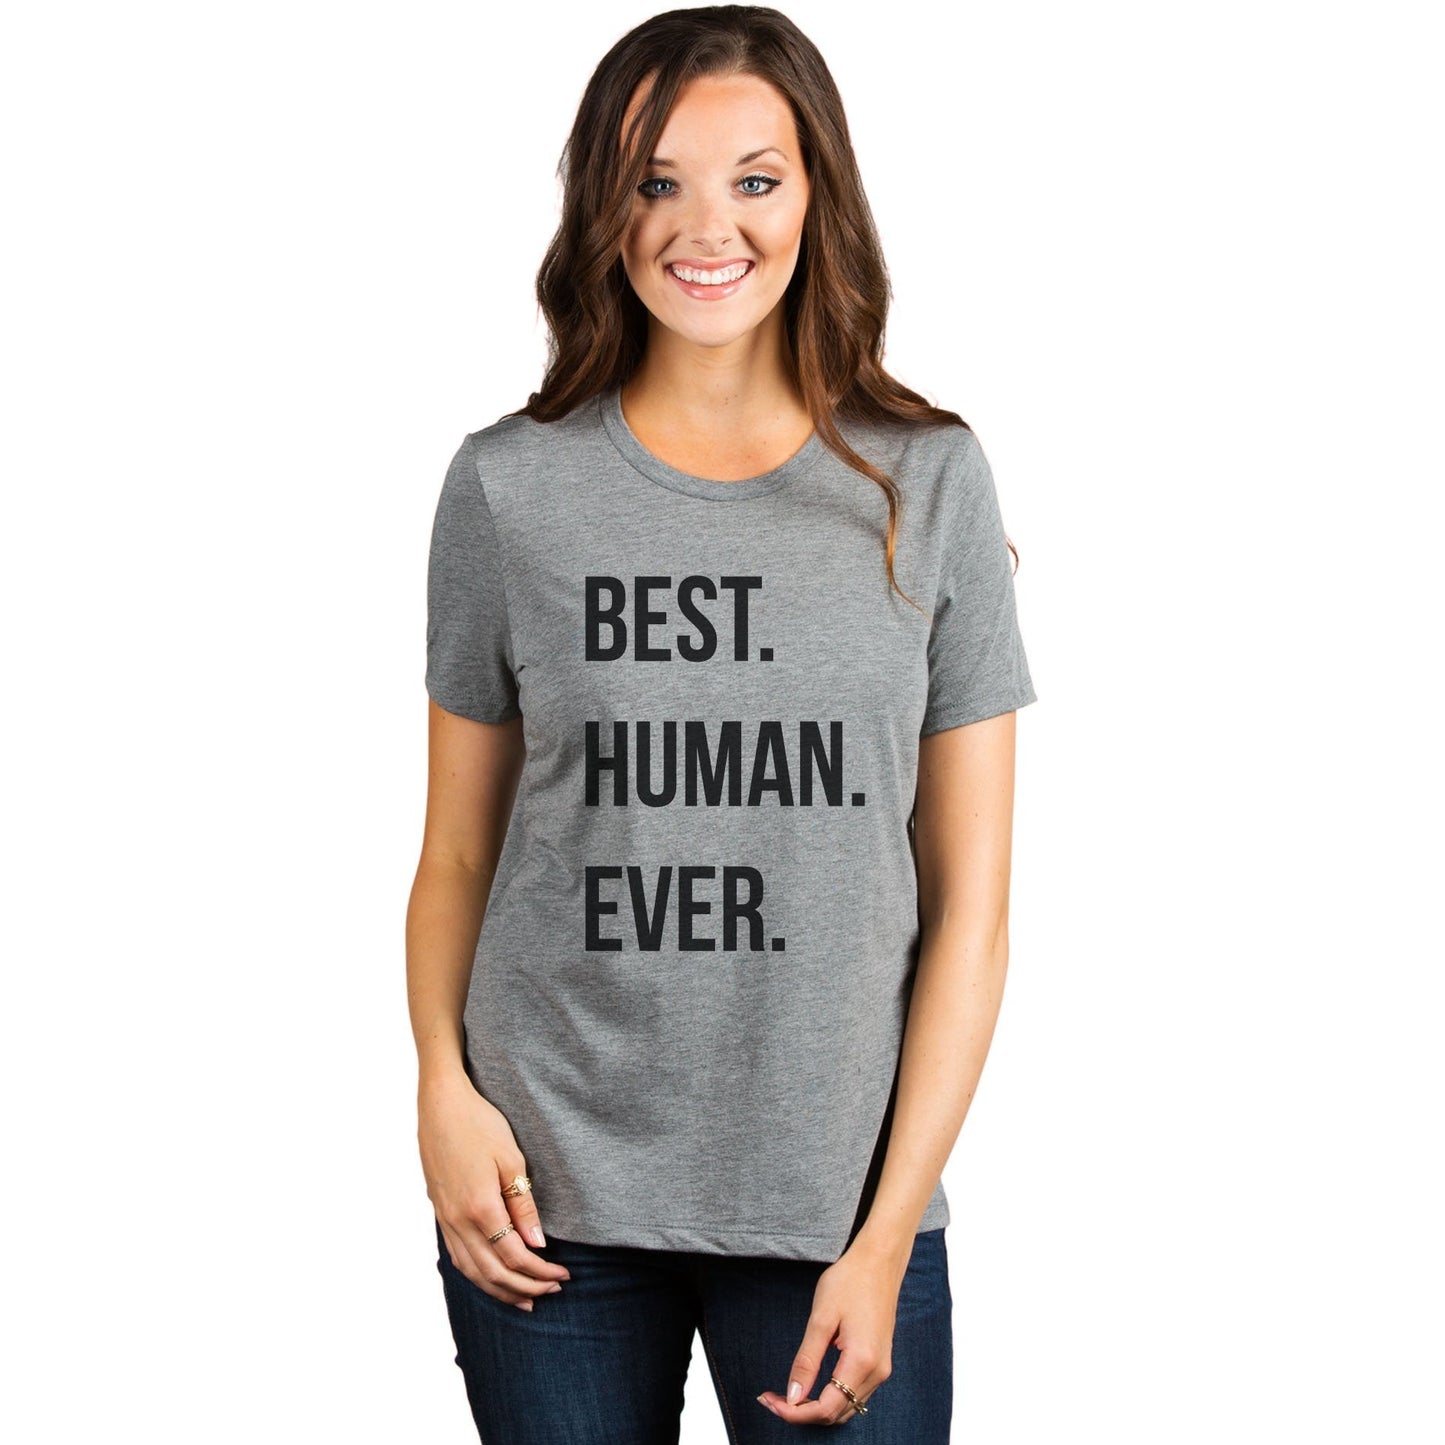 Best Human Ever - Thread Tank | Stories You Can Wear | T-Shirts, Tank Tops and Sweatshirts